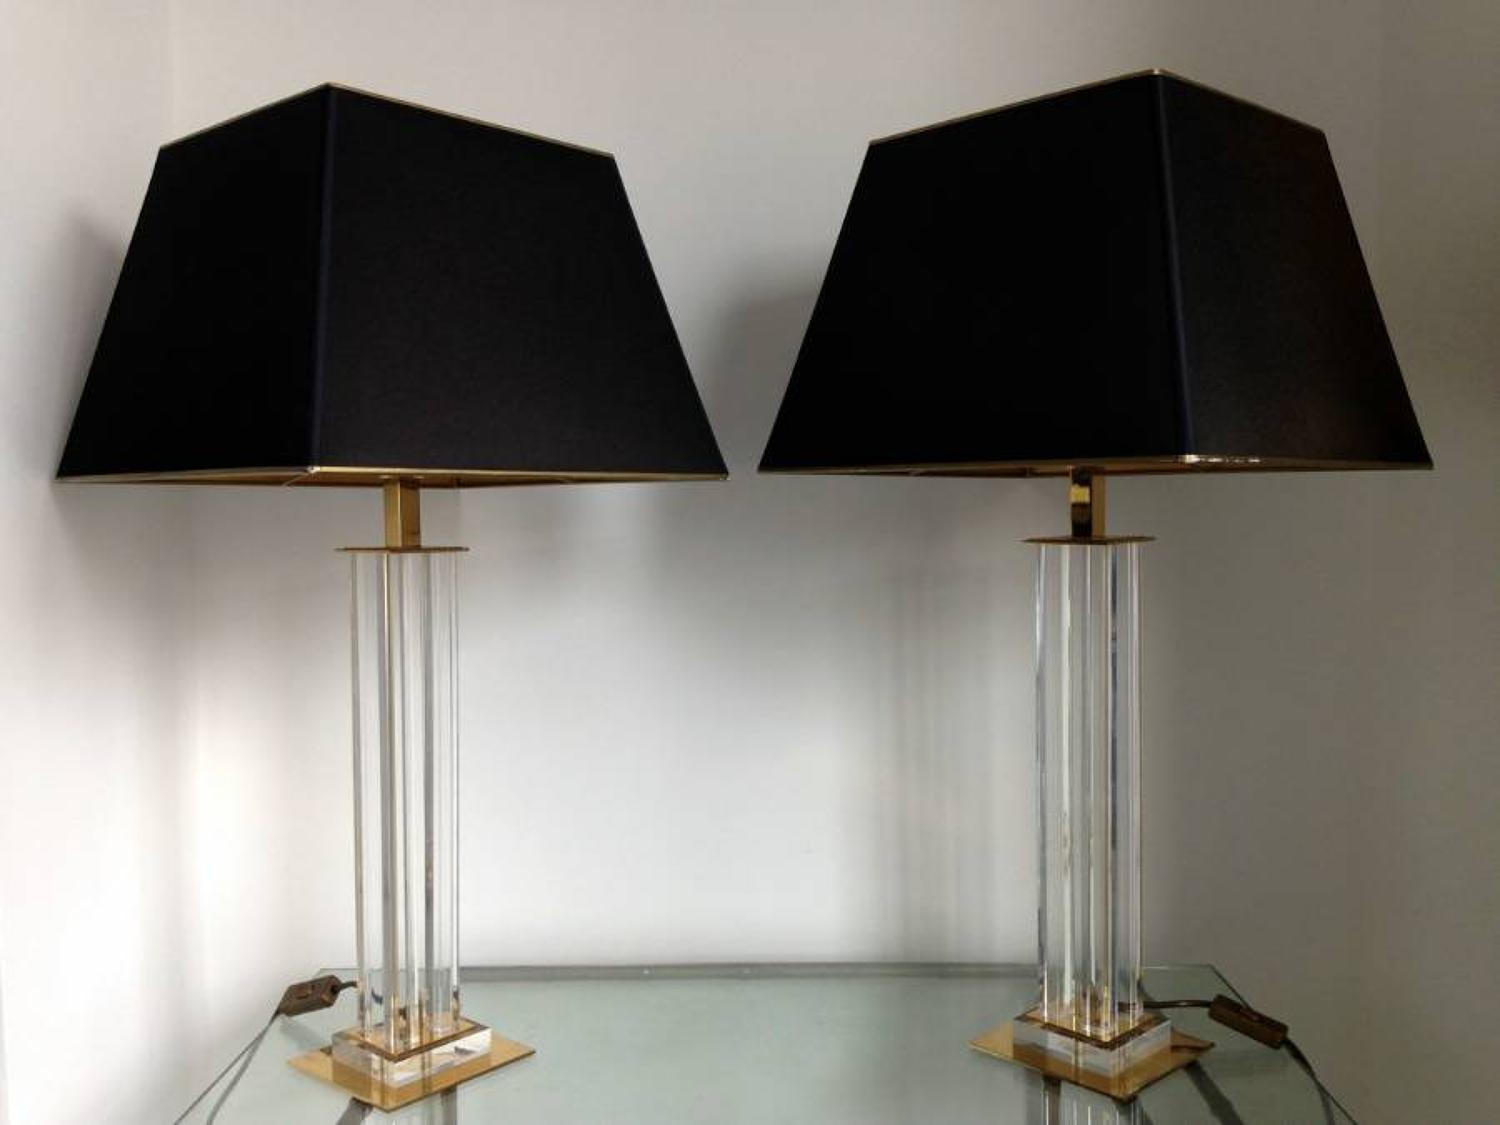 A pair of lucite and brass table lamps